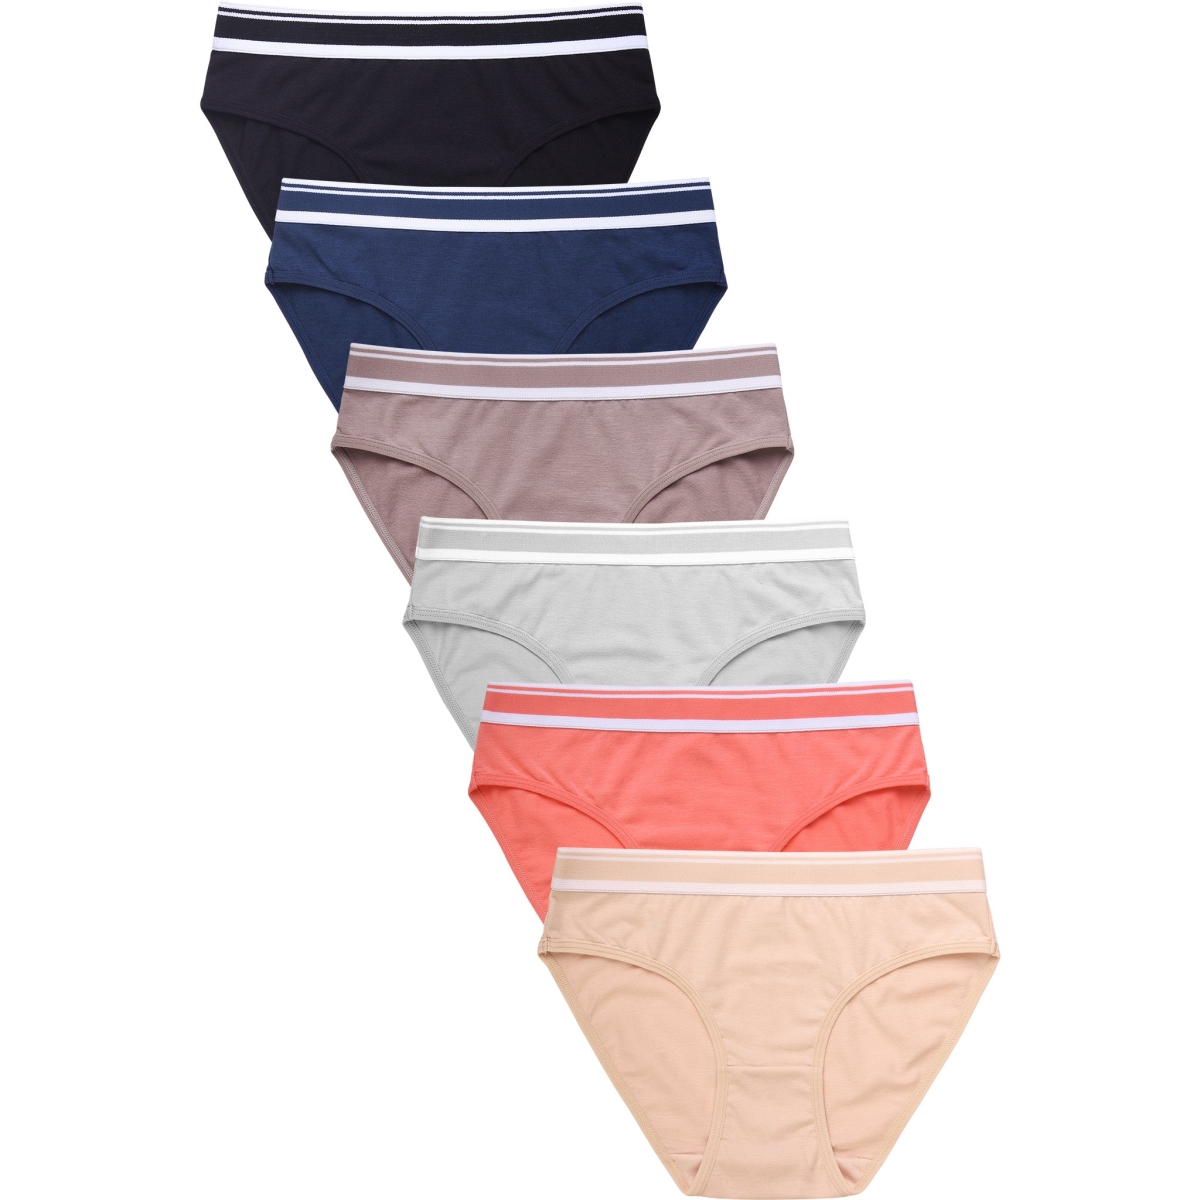 Picture of 247 Frenzy 247-LP1431CK4-SM Sofra Womens Essentials Cotton Stretch Bikini Panty Underwear - Assorted Color - Small - Pack of 6